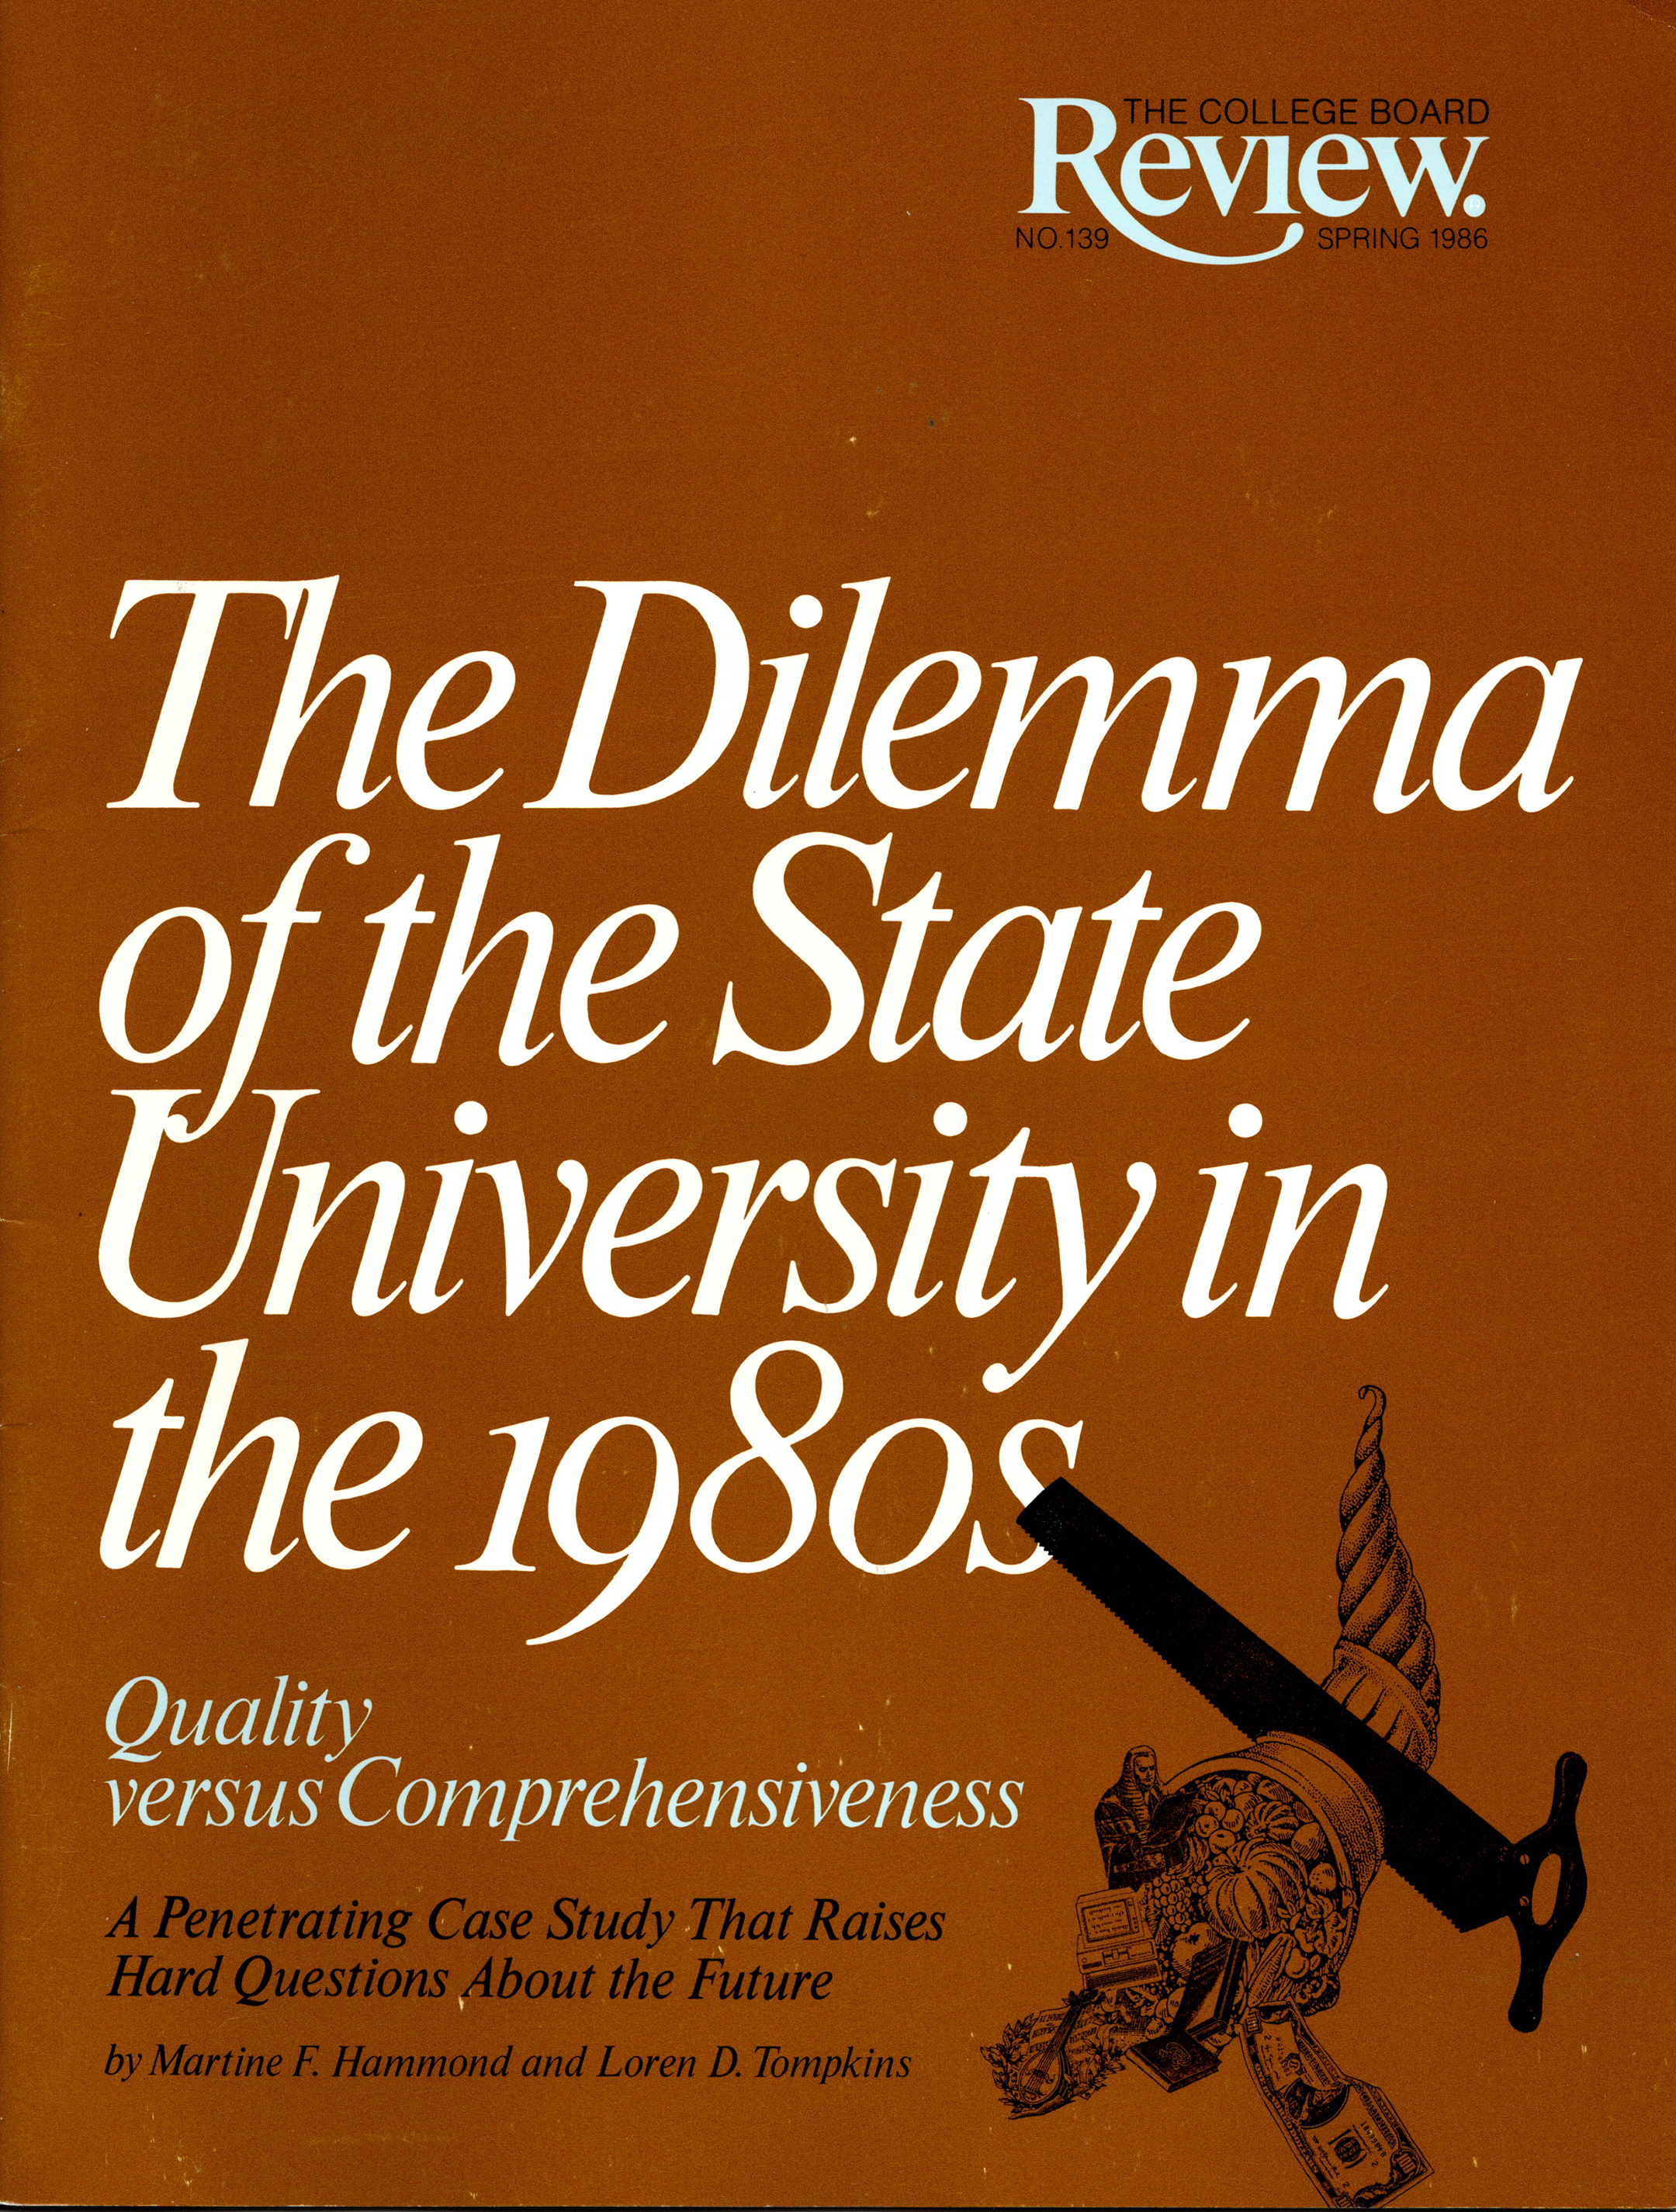 cover of the spring 1986 issue of the college board review magazine, with the headline "the dilemma of the state university in the 1980s" written in white text on a brown background